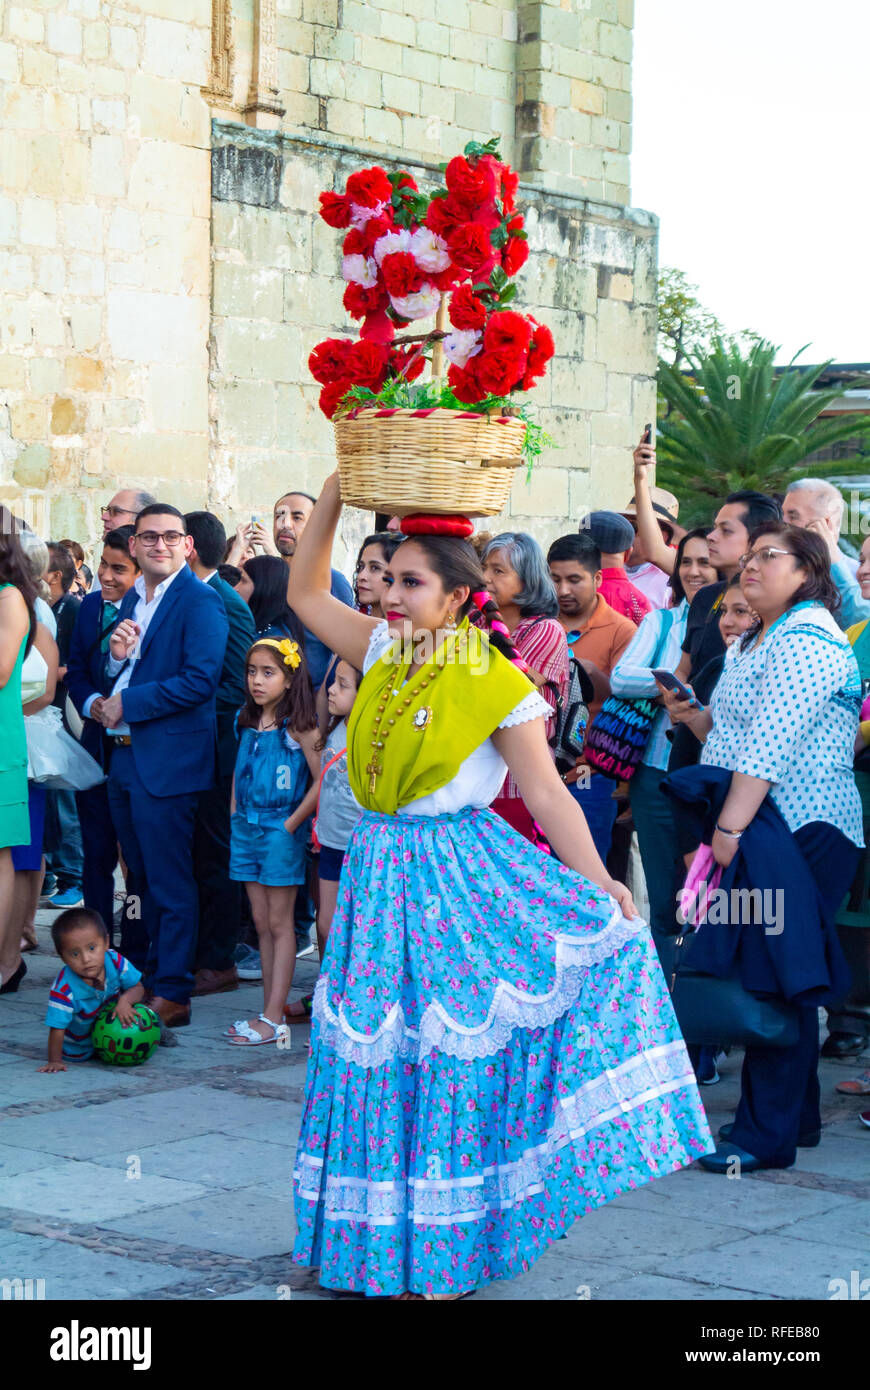 Local young woman in a traditional costume, oaxaca, mexico Stock Photo